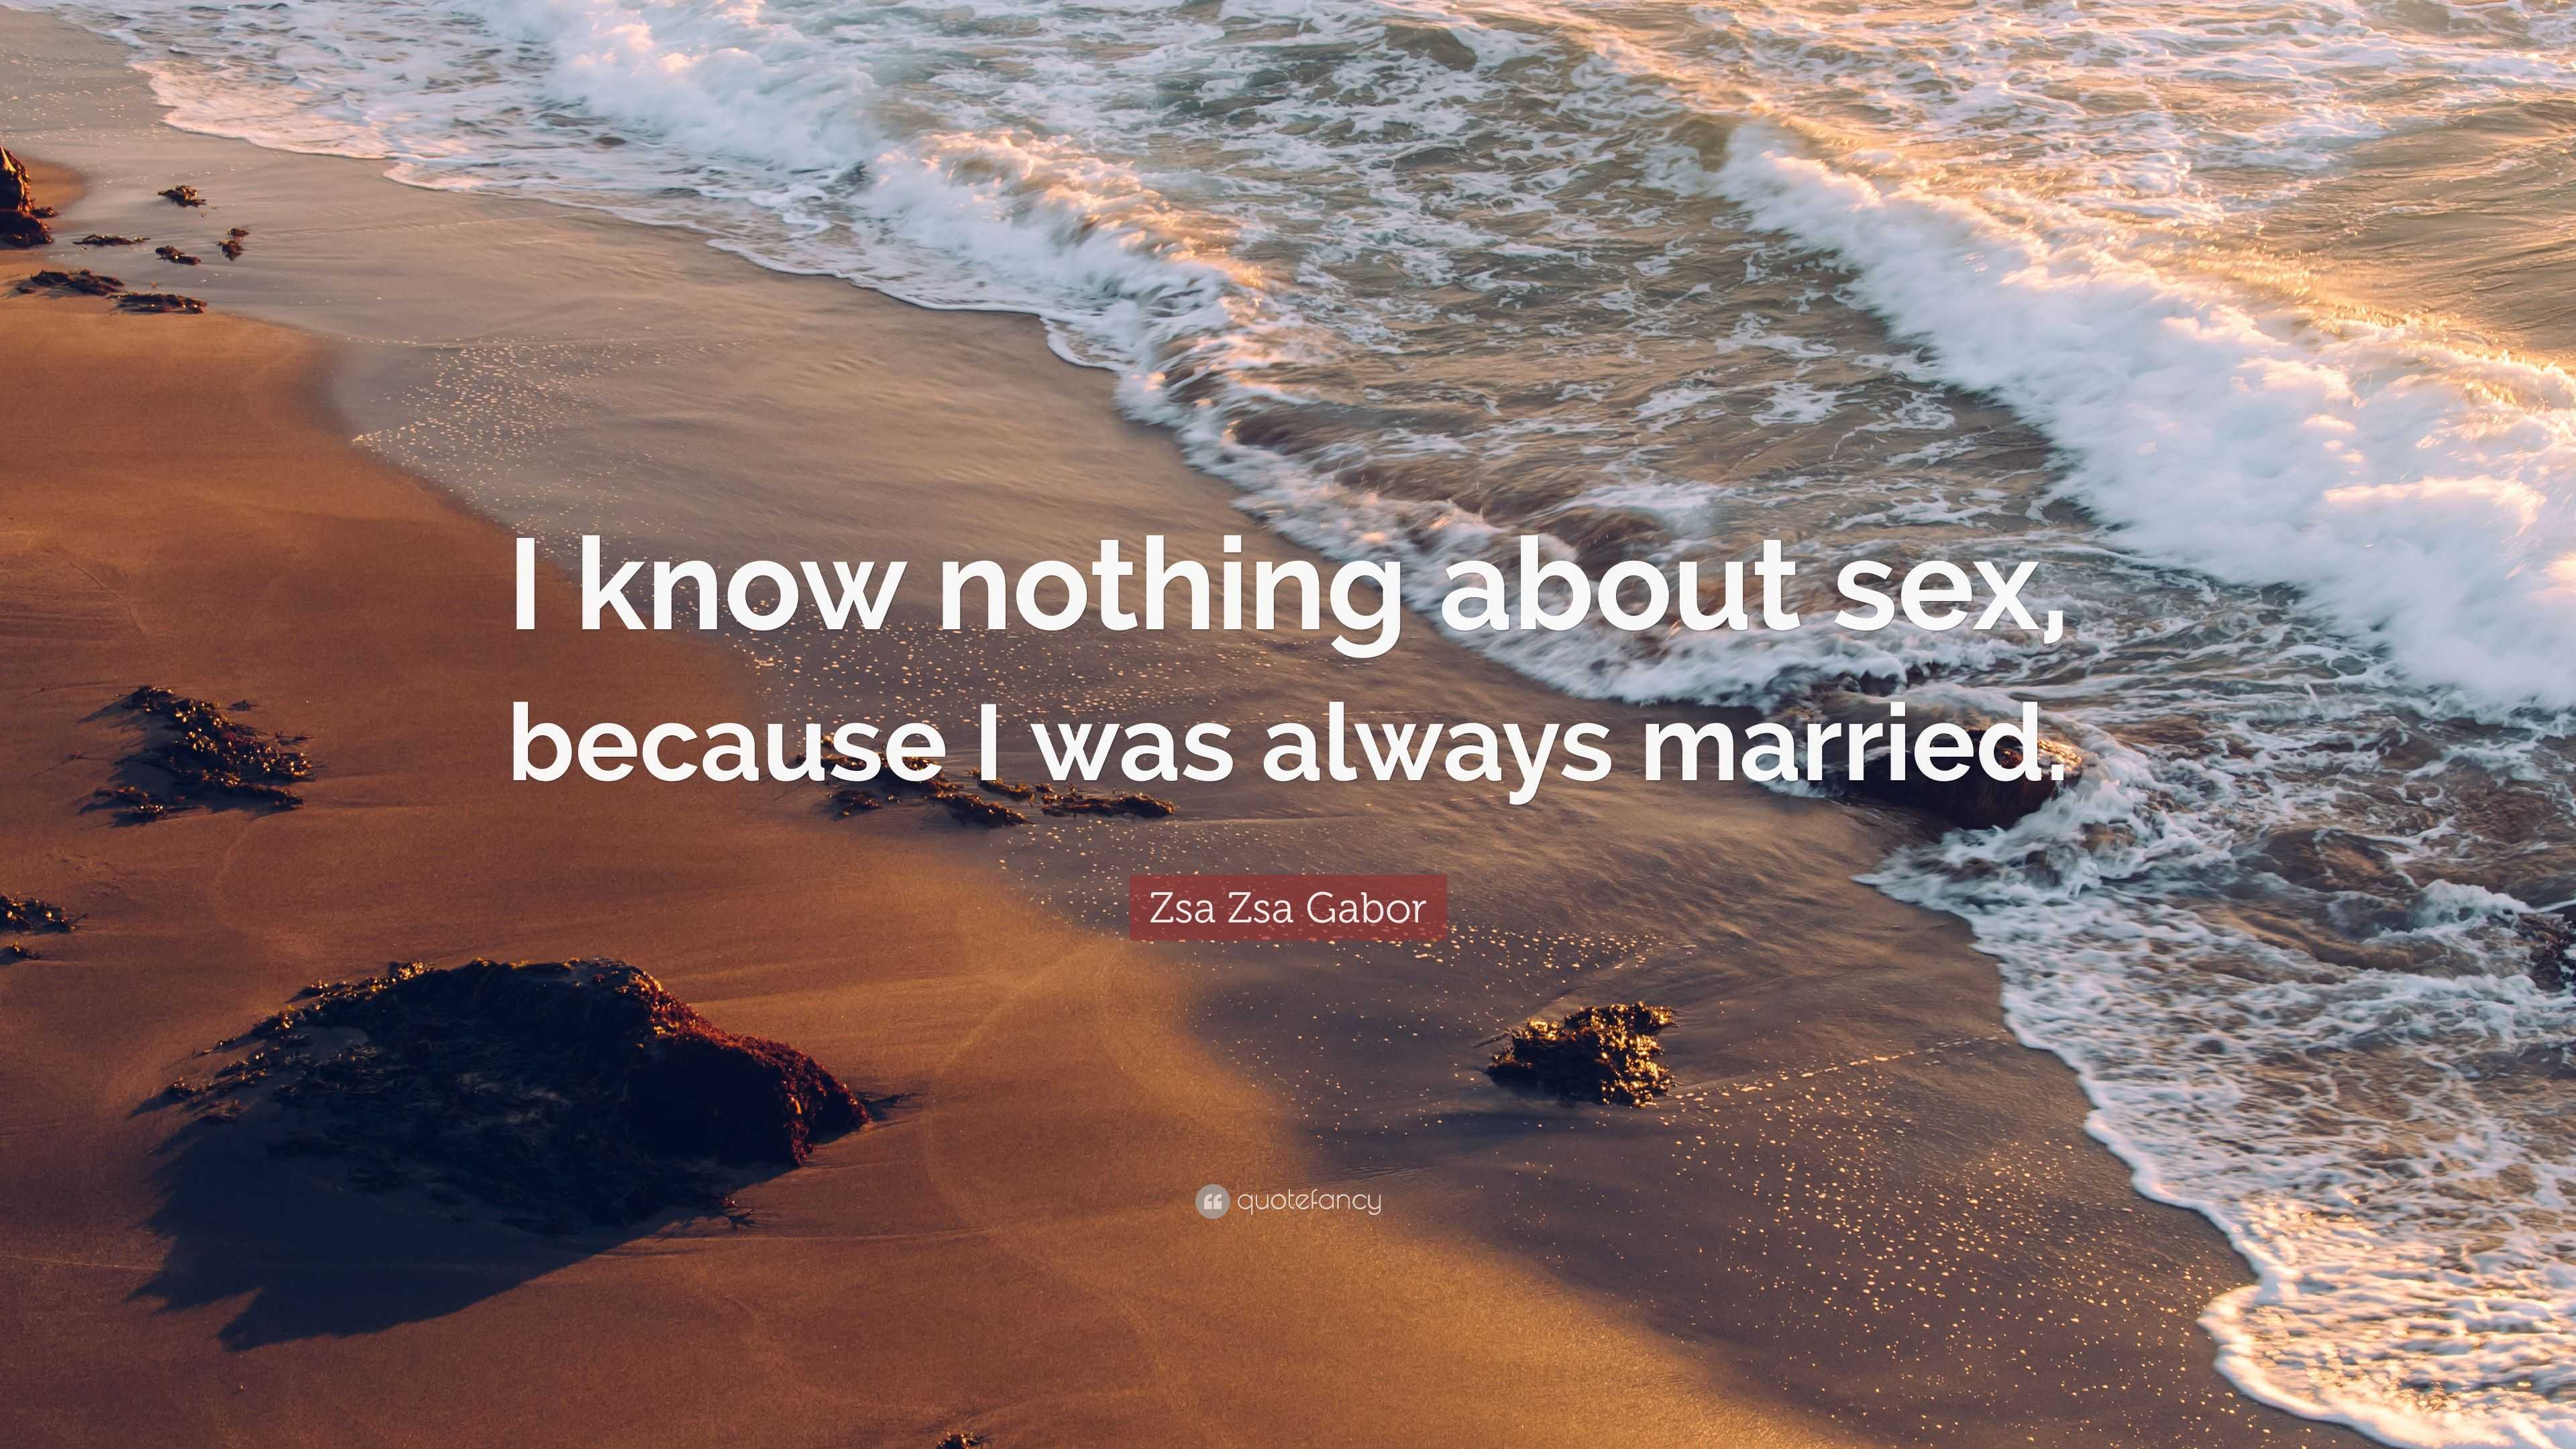 Zsa Zsa Gabor Quote “i Know Nothing About Sex Because I Was Always Married” 0647